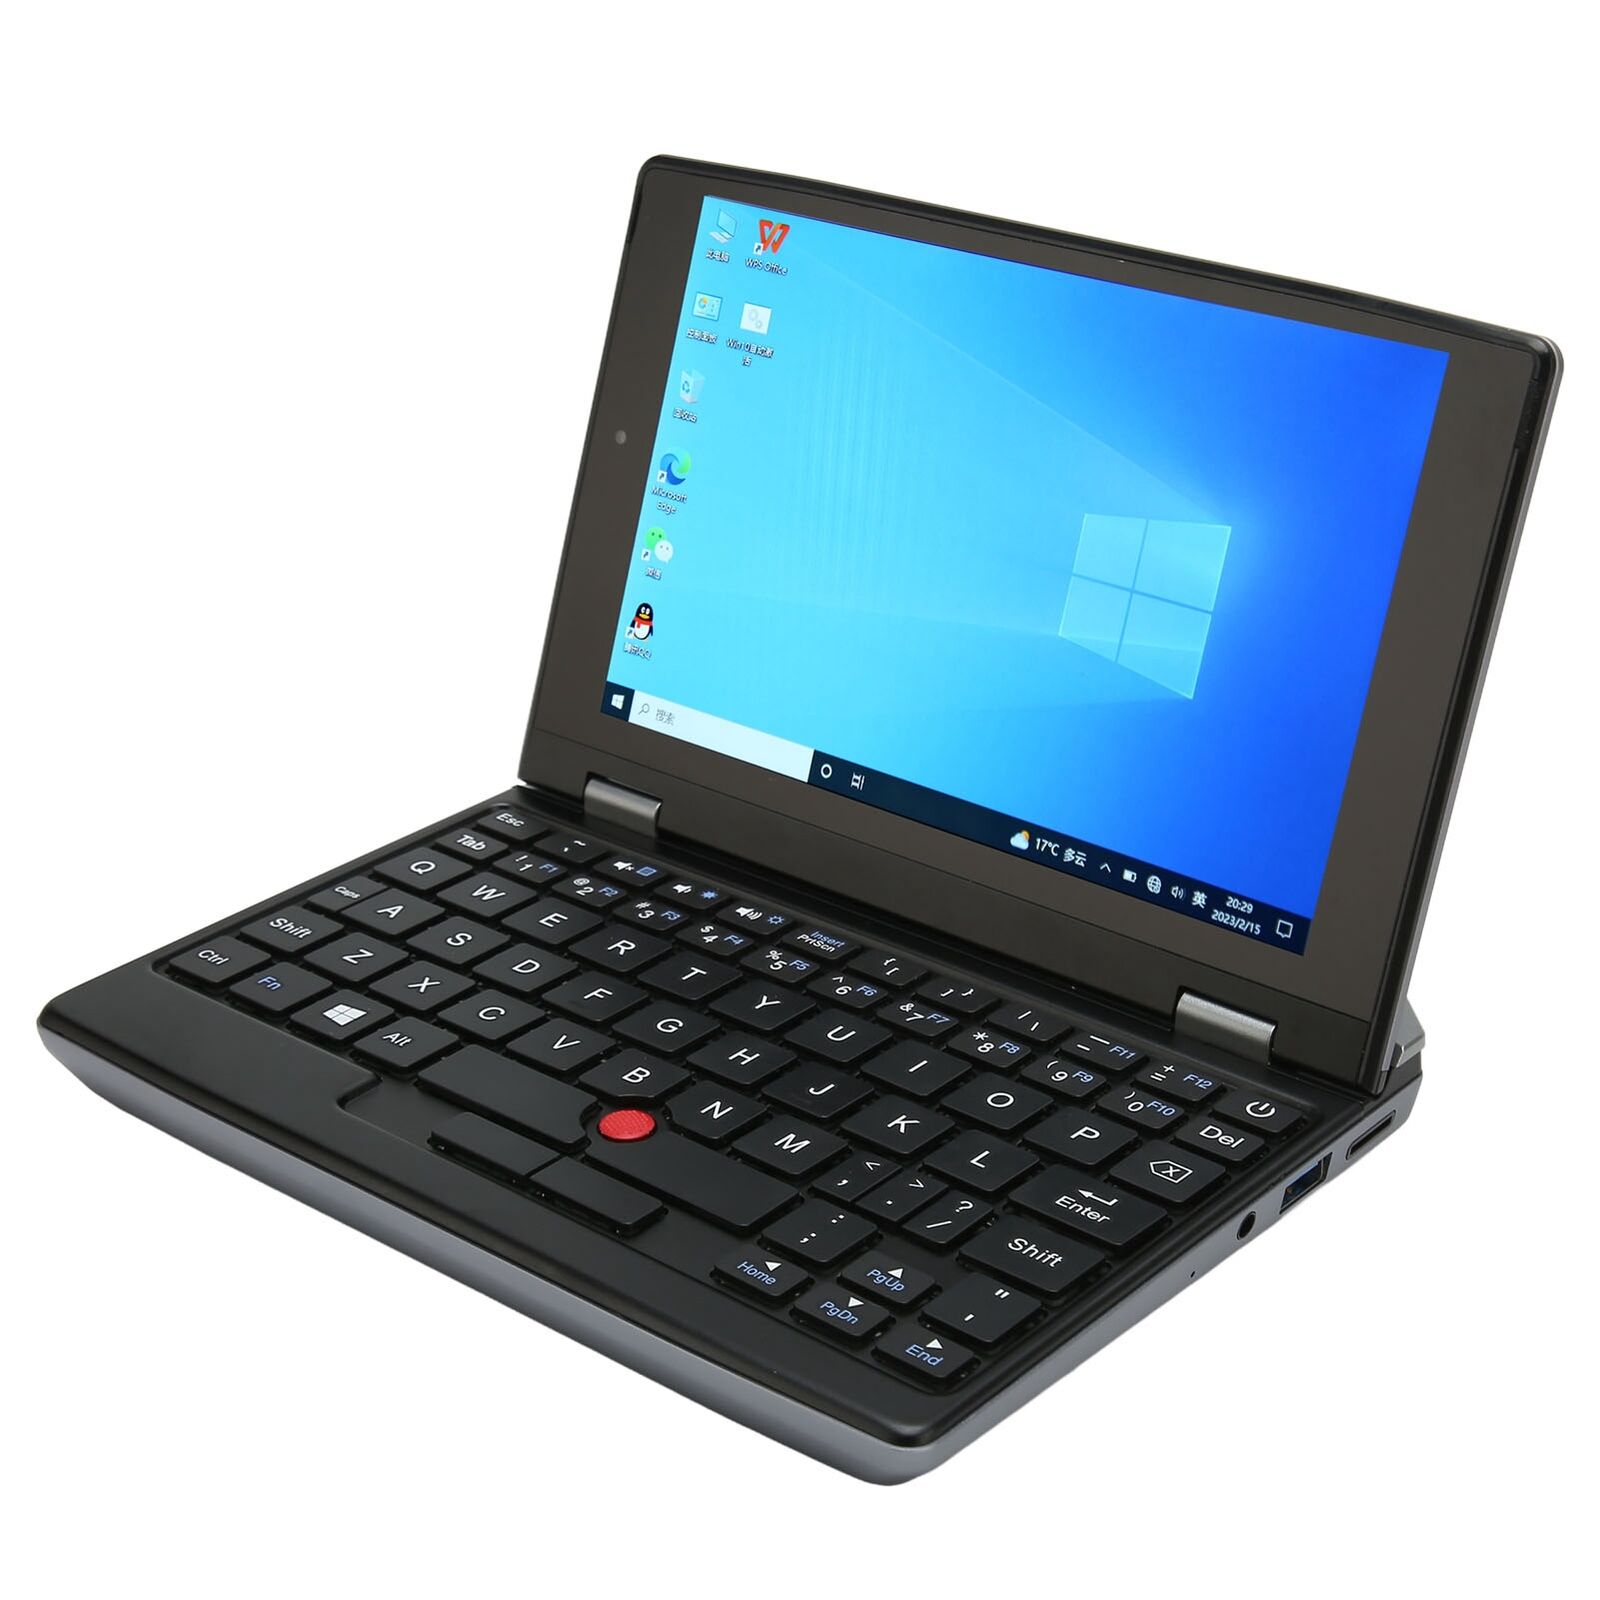 Notebook Computer Mini Laptop 12GB RAM 7 Inch For Office